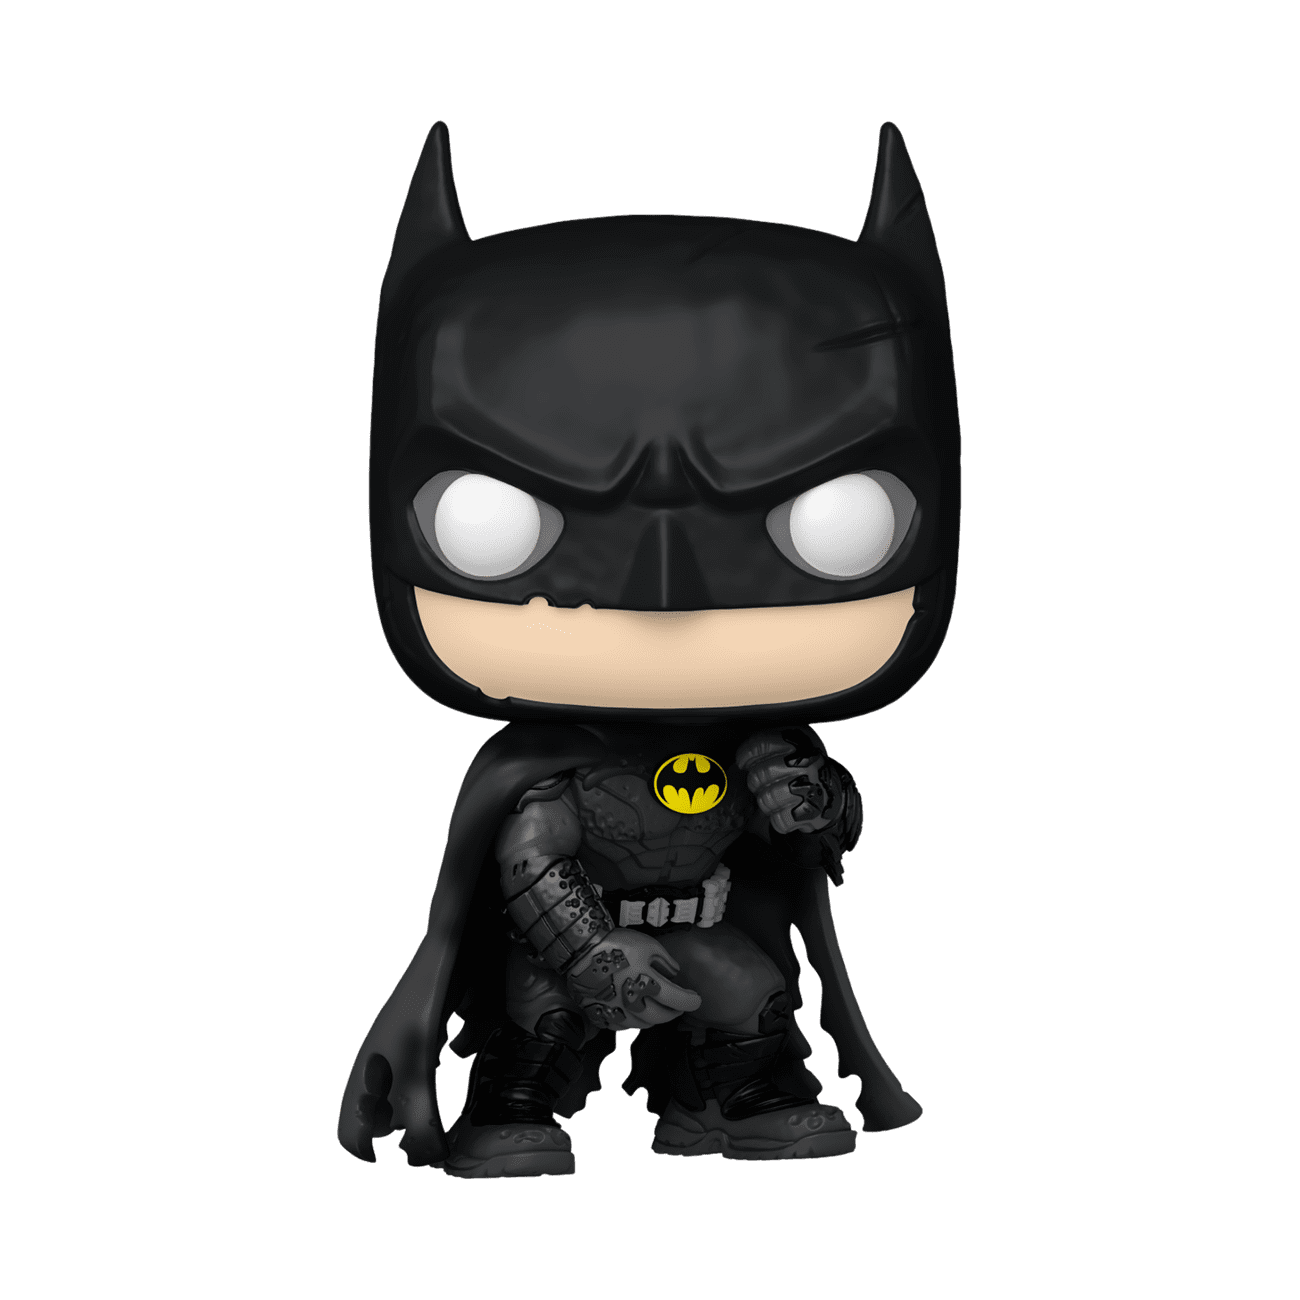 Funko Pictures  Download Free Images on Unsplash